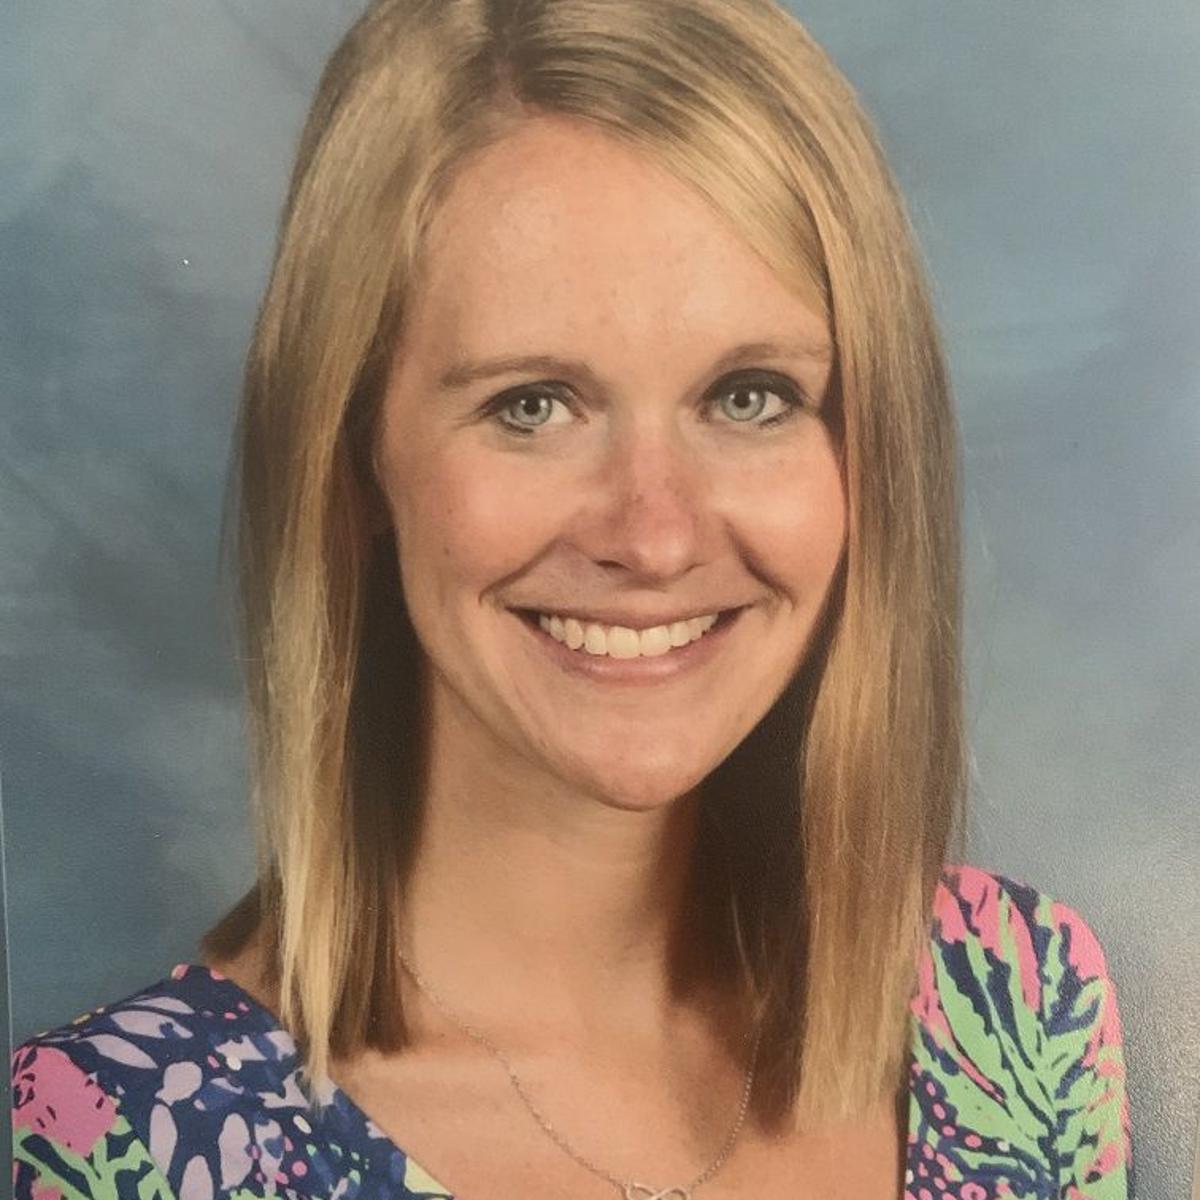 Clymore Elementary: Meredith Carter, 4th grade